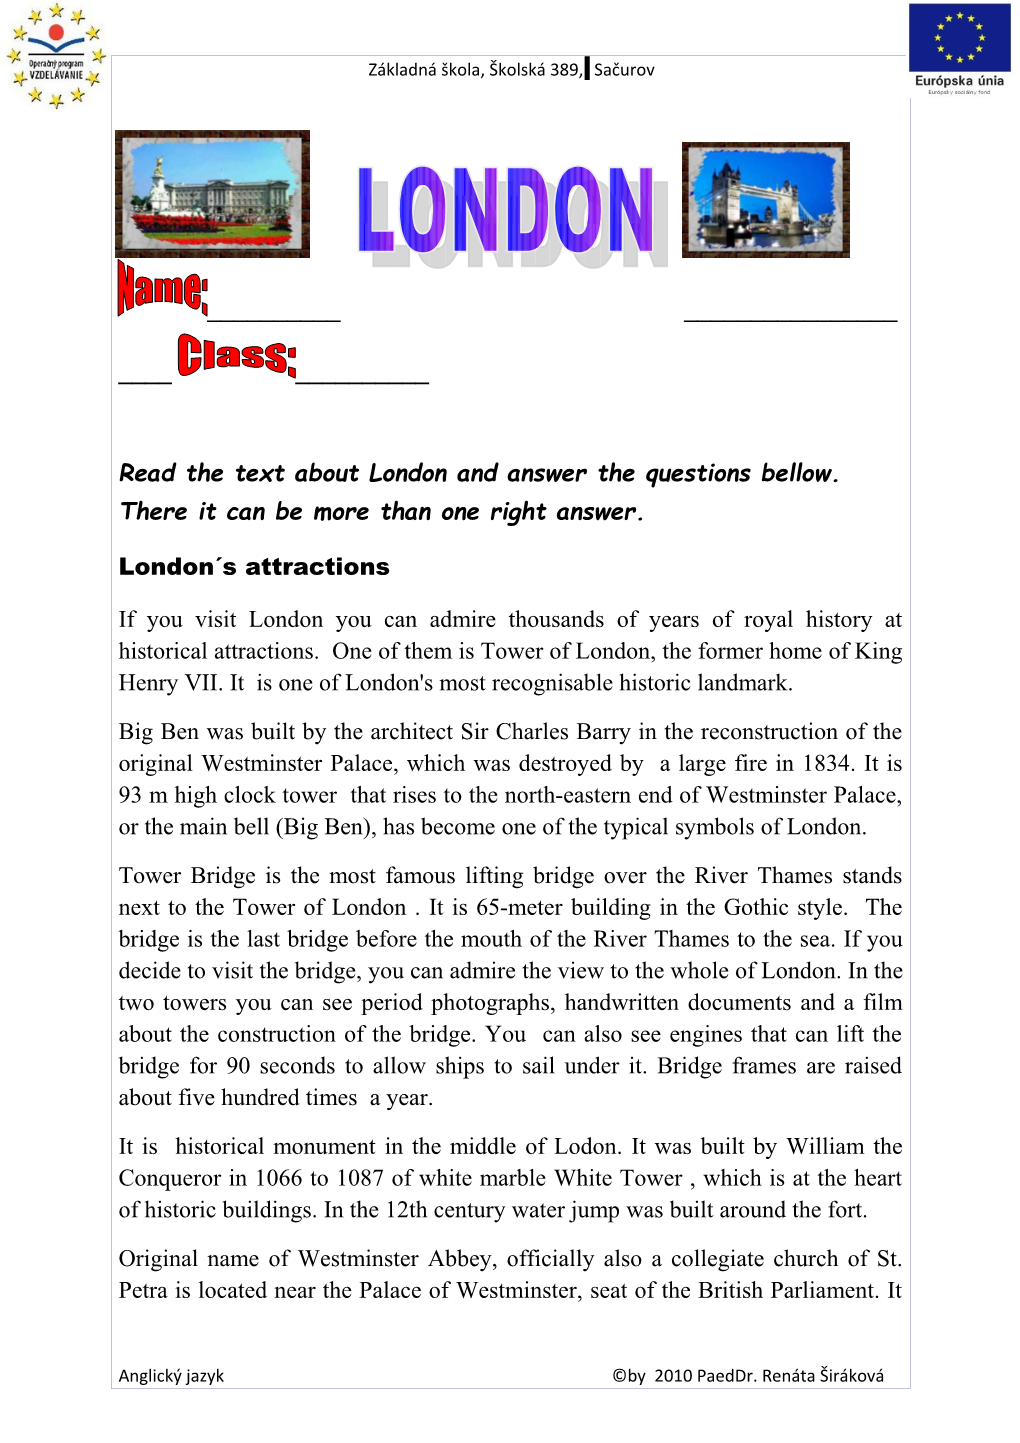 Read the Text About London and Answer the Questions Bellow. There It Can Be More Than